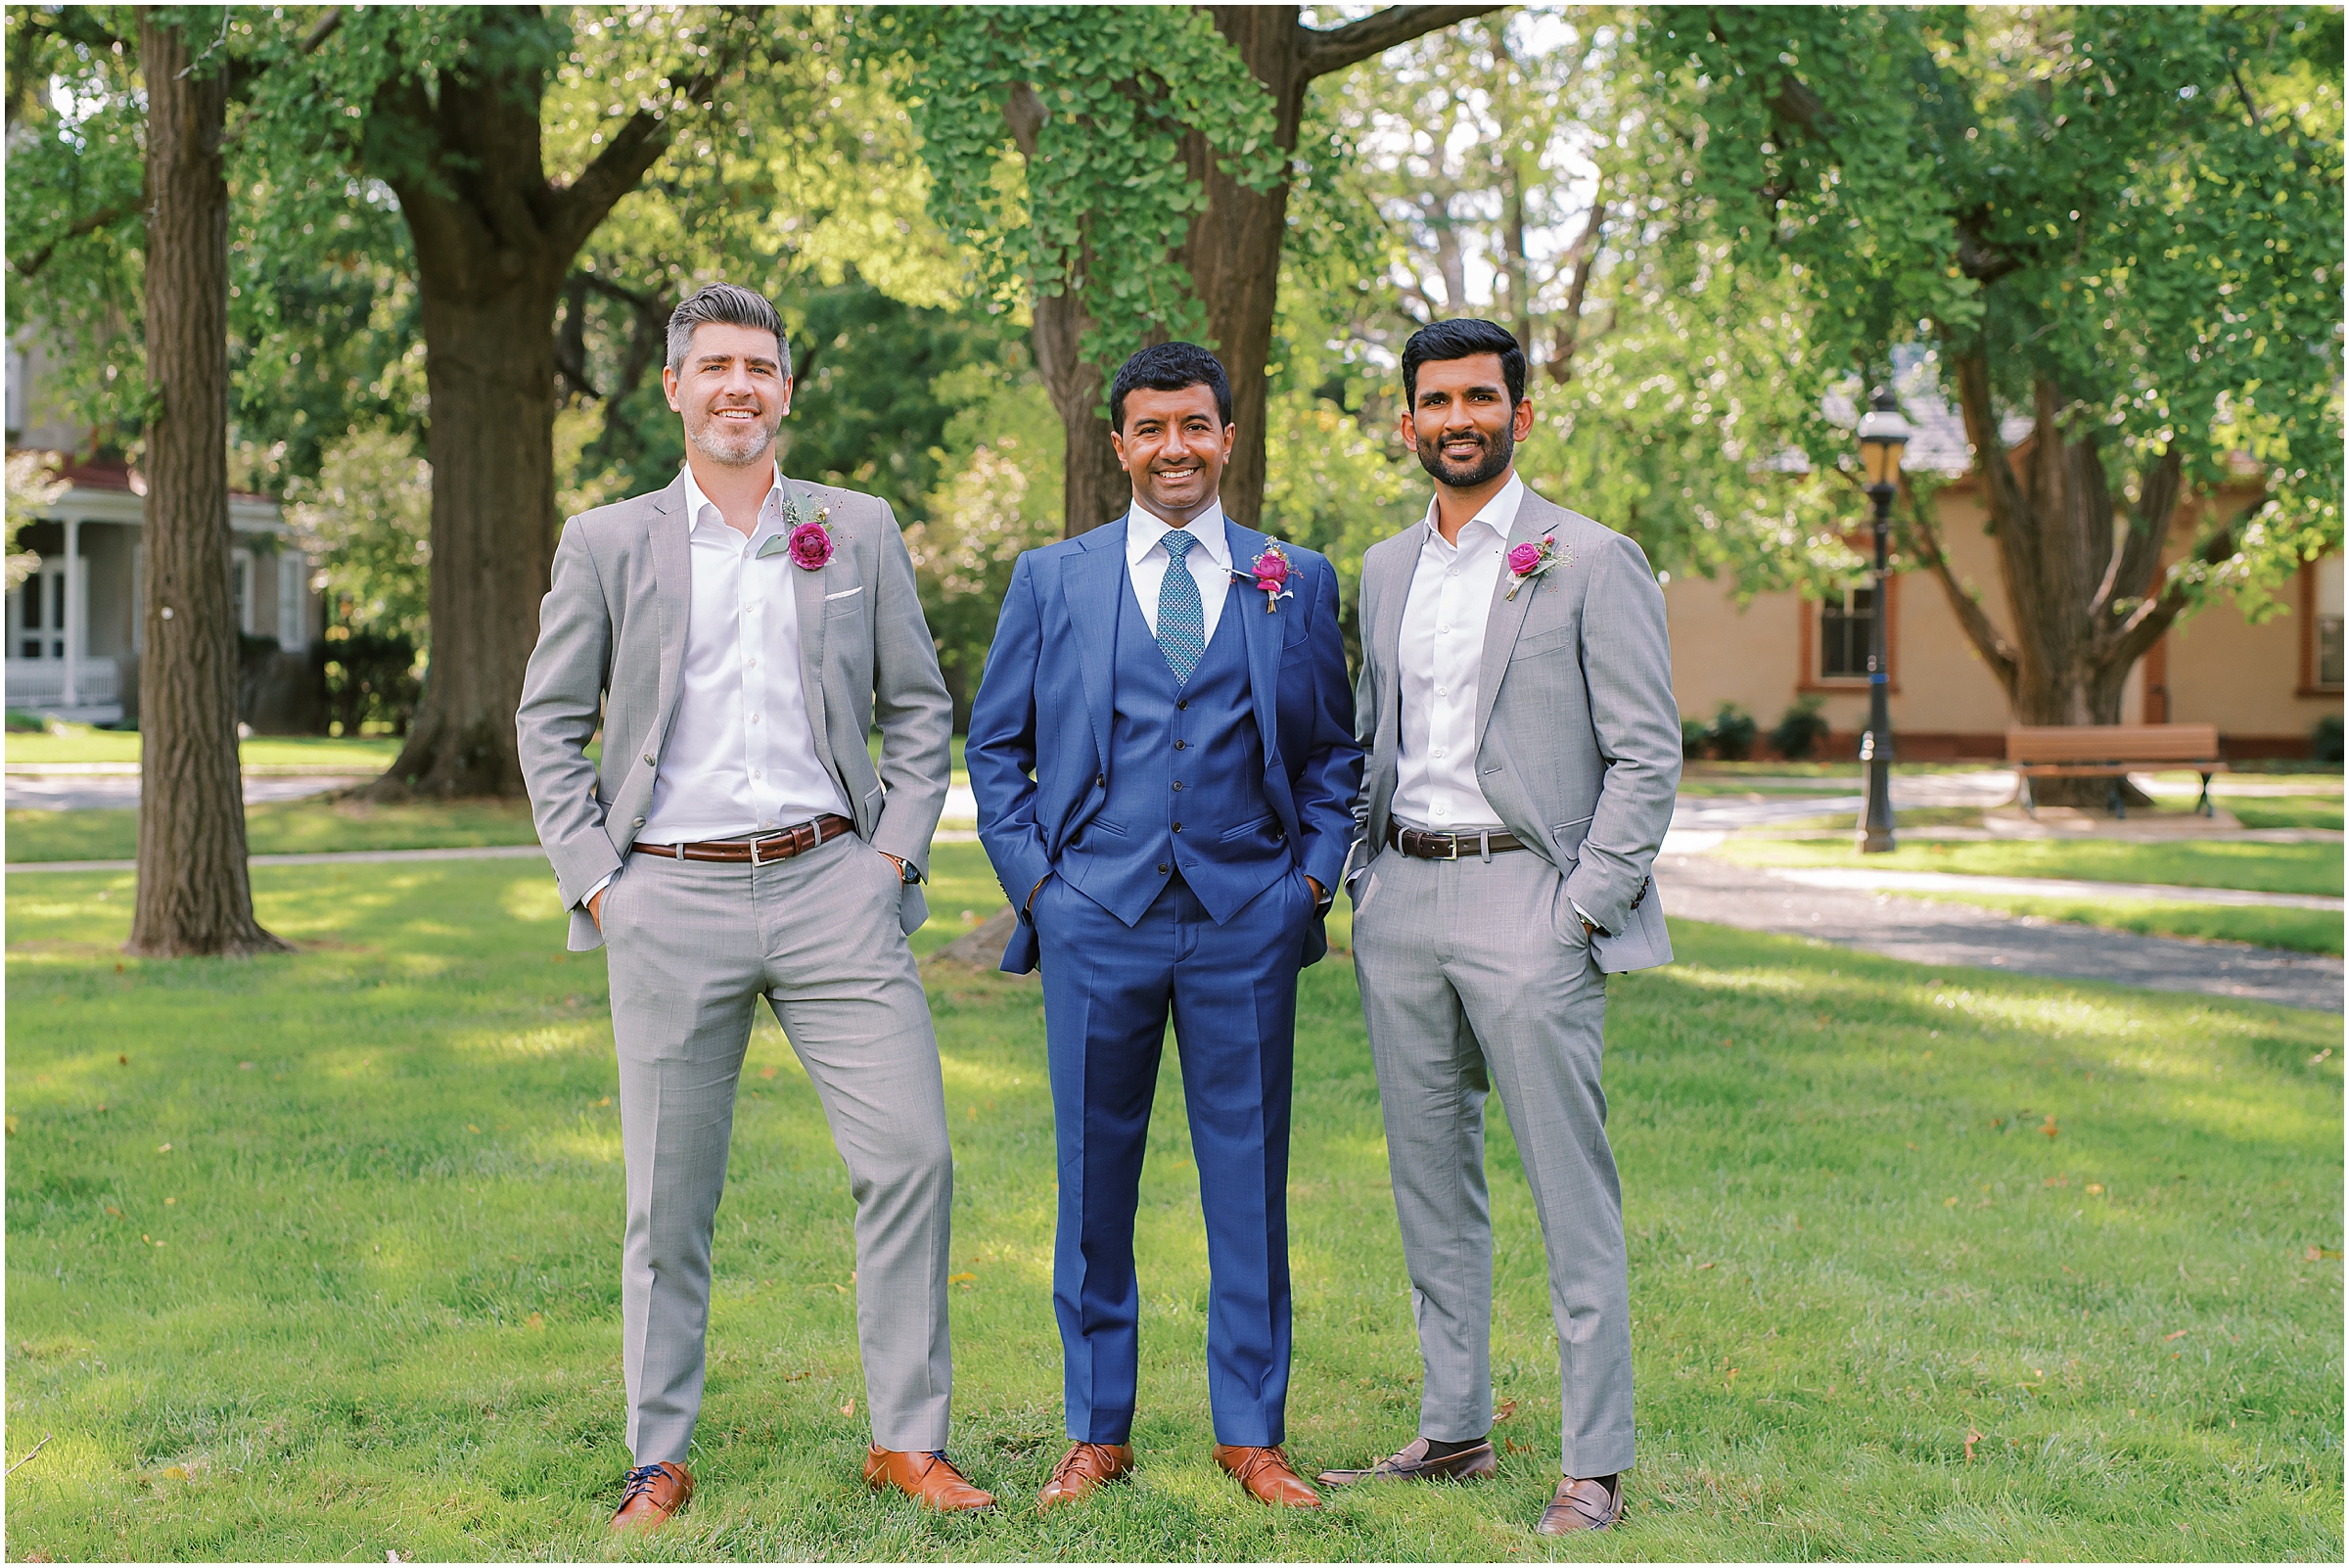 Groomsmen in grey suits with colorful boutonnières 